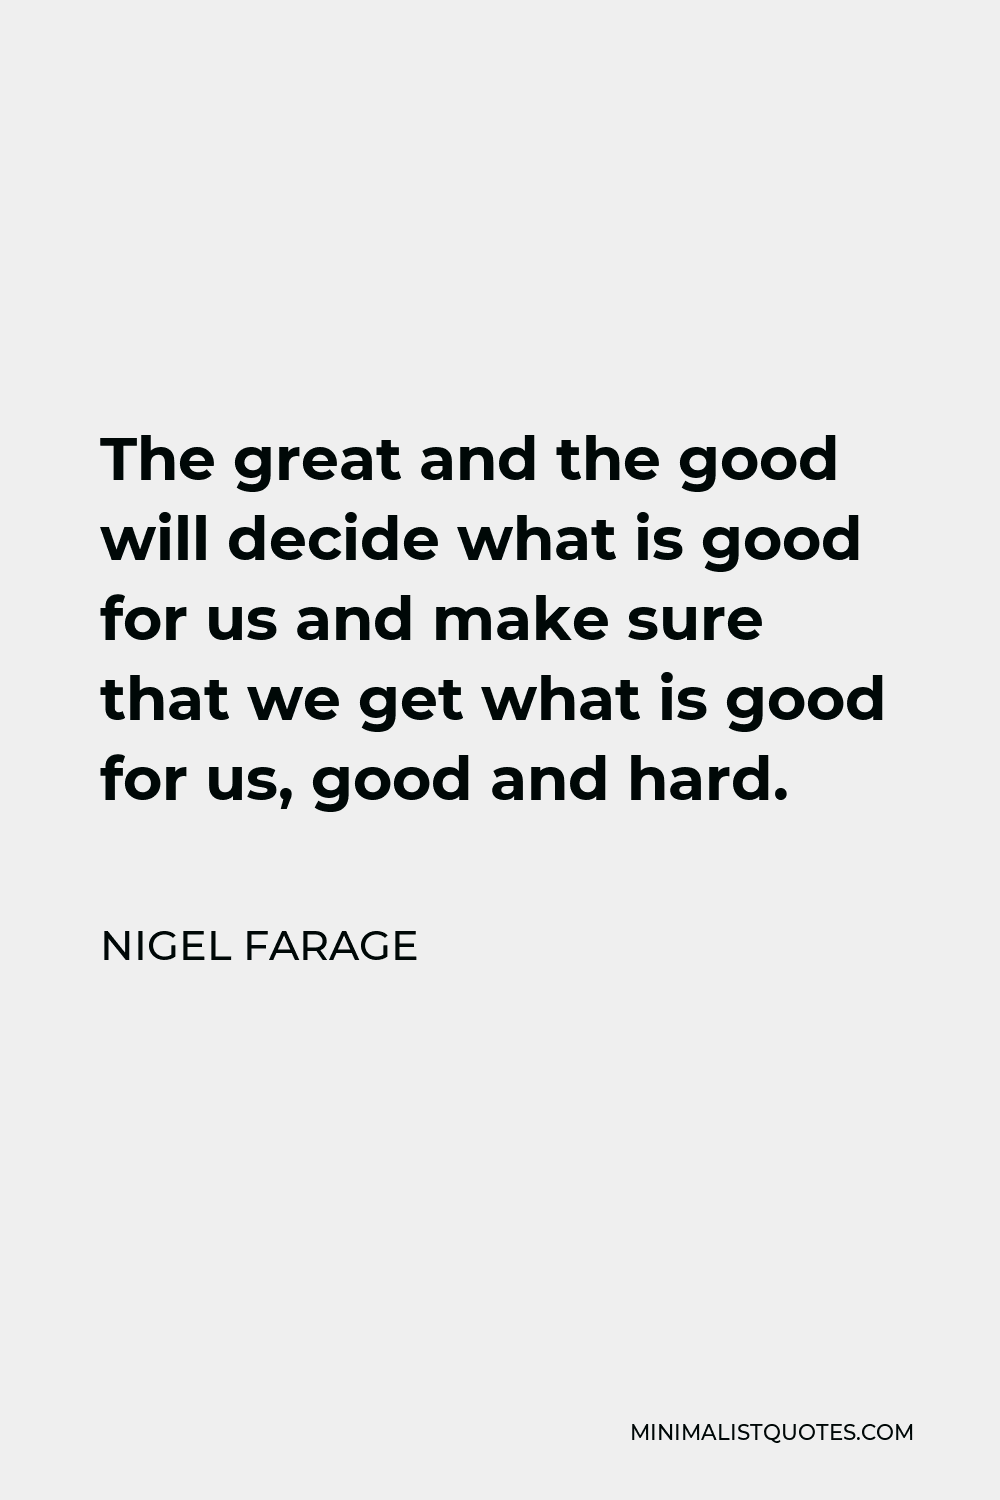 Nigel Farage Quote - The great and the good will decide what is good for us and make sure that we get what is good for us, good and hard.